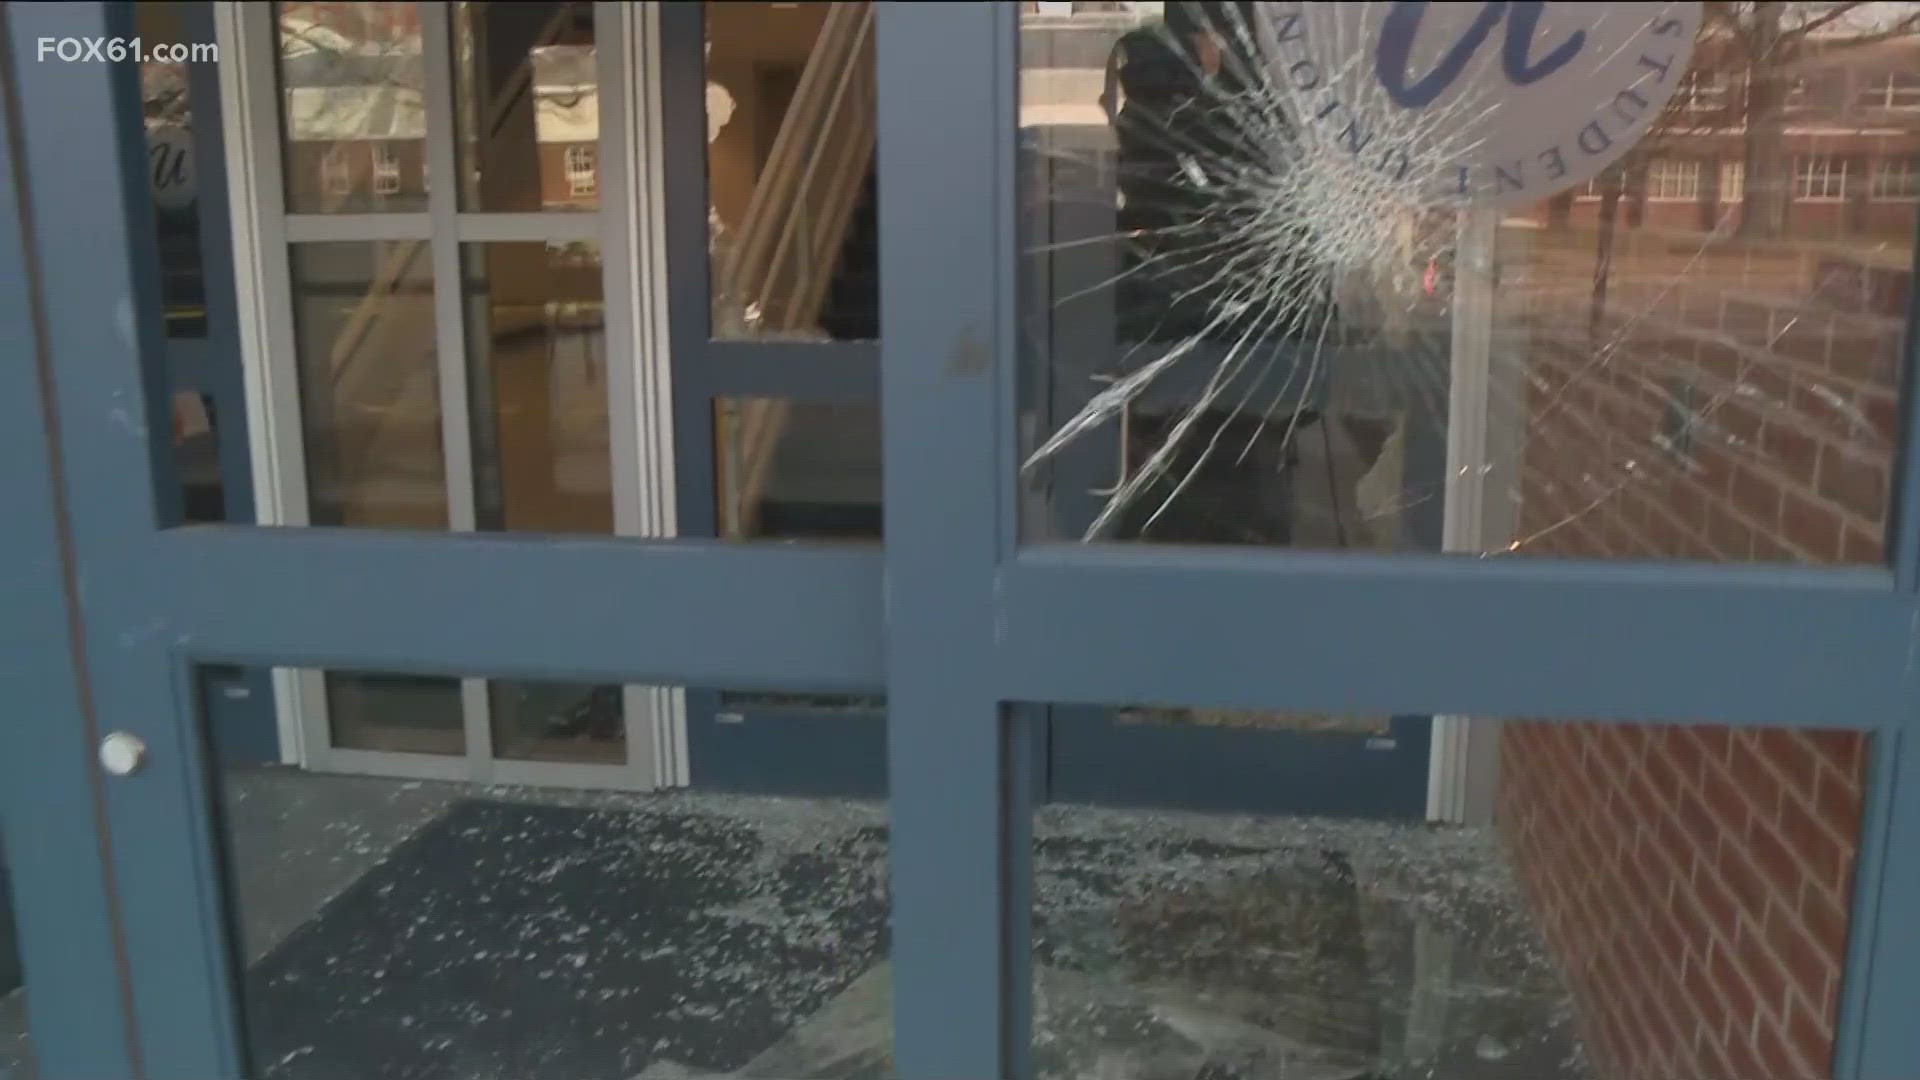 Some UConn students were arrested for causing the damage done on campus following the men's championship victory.